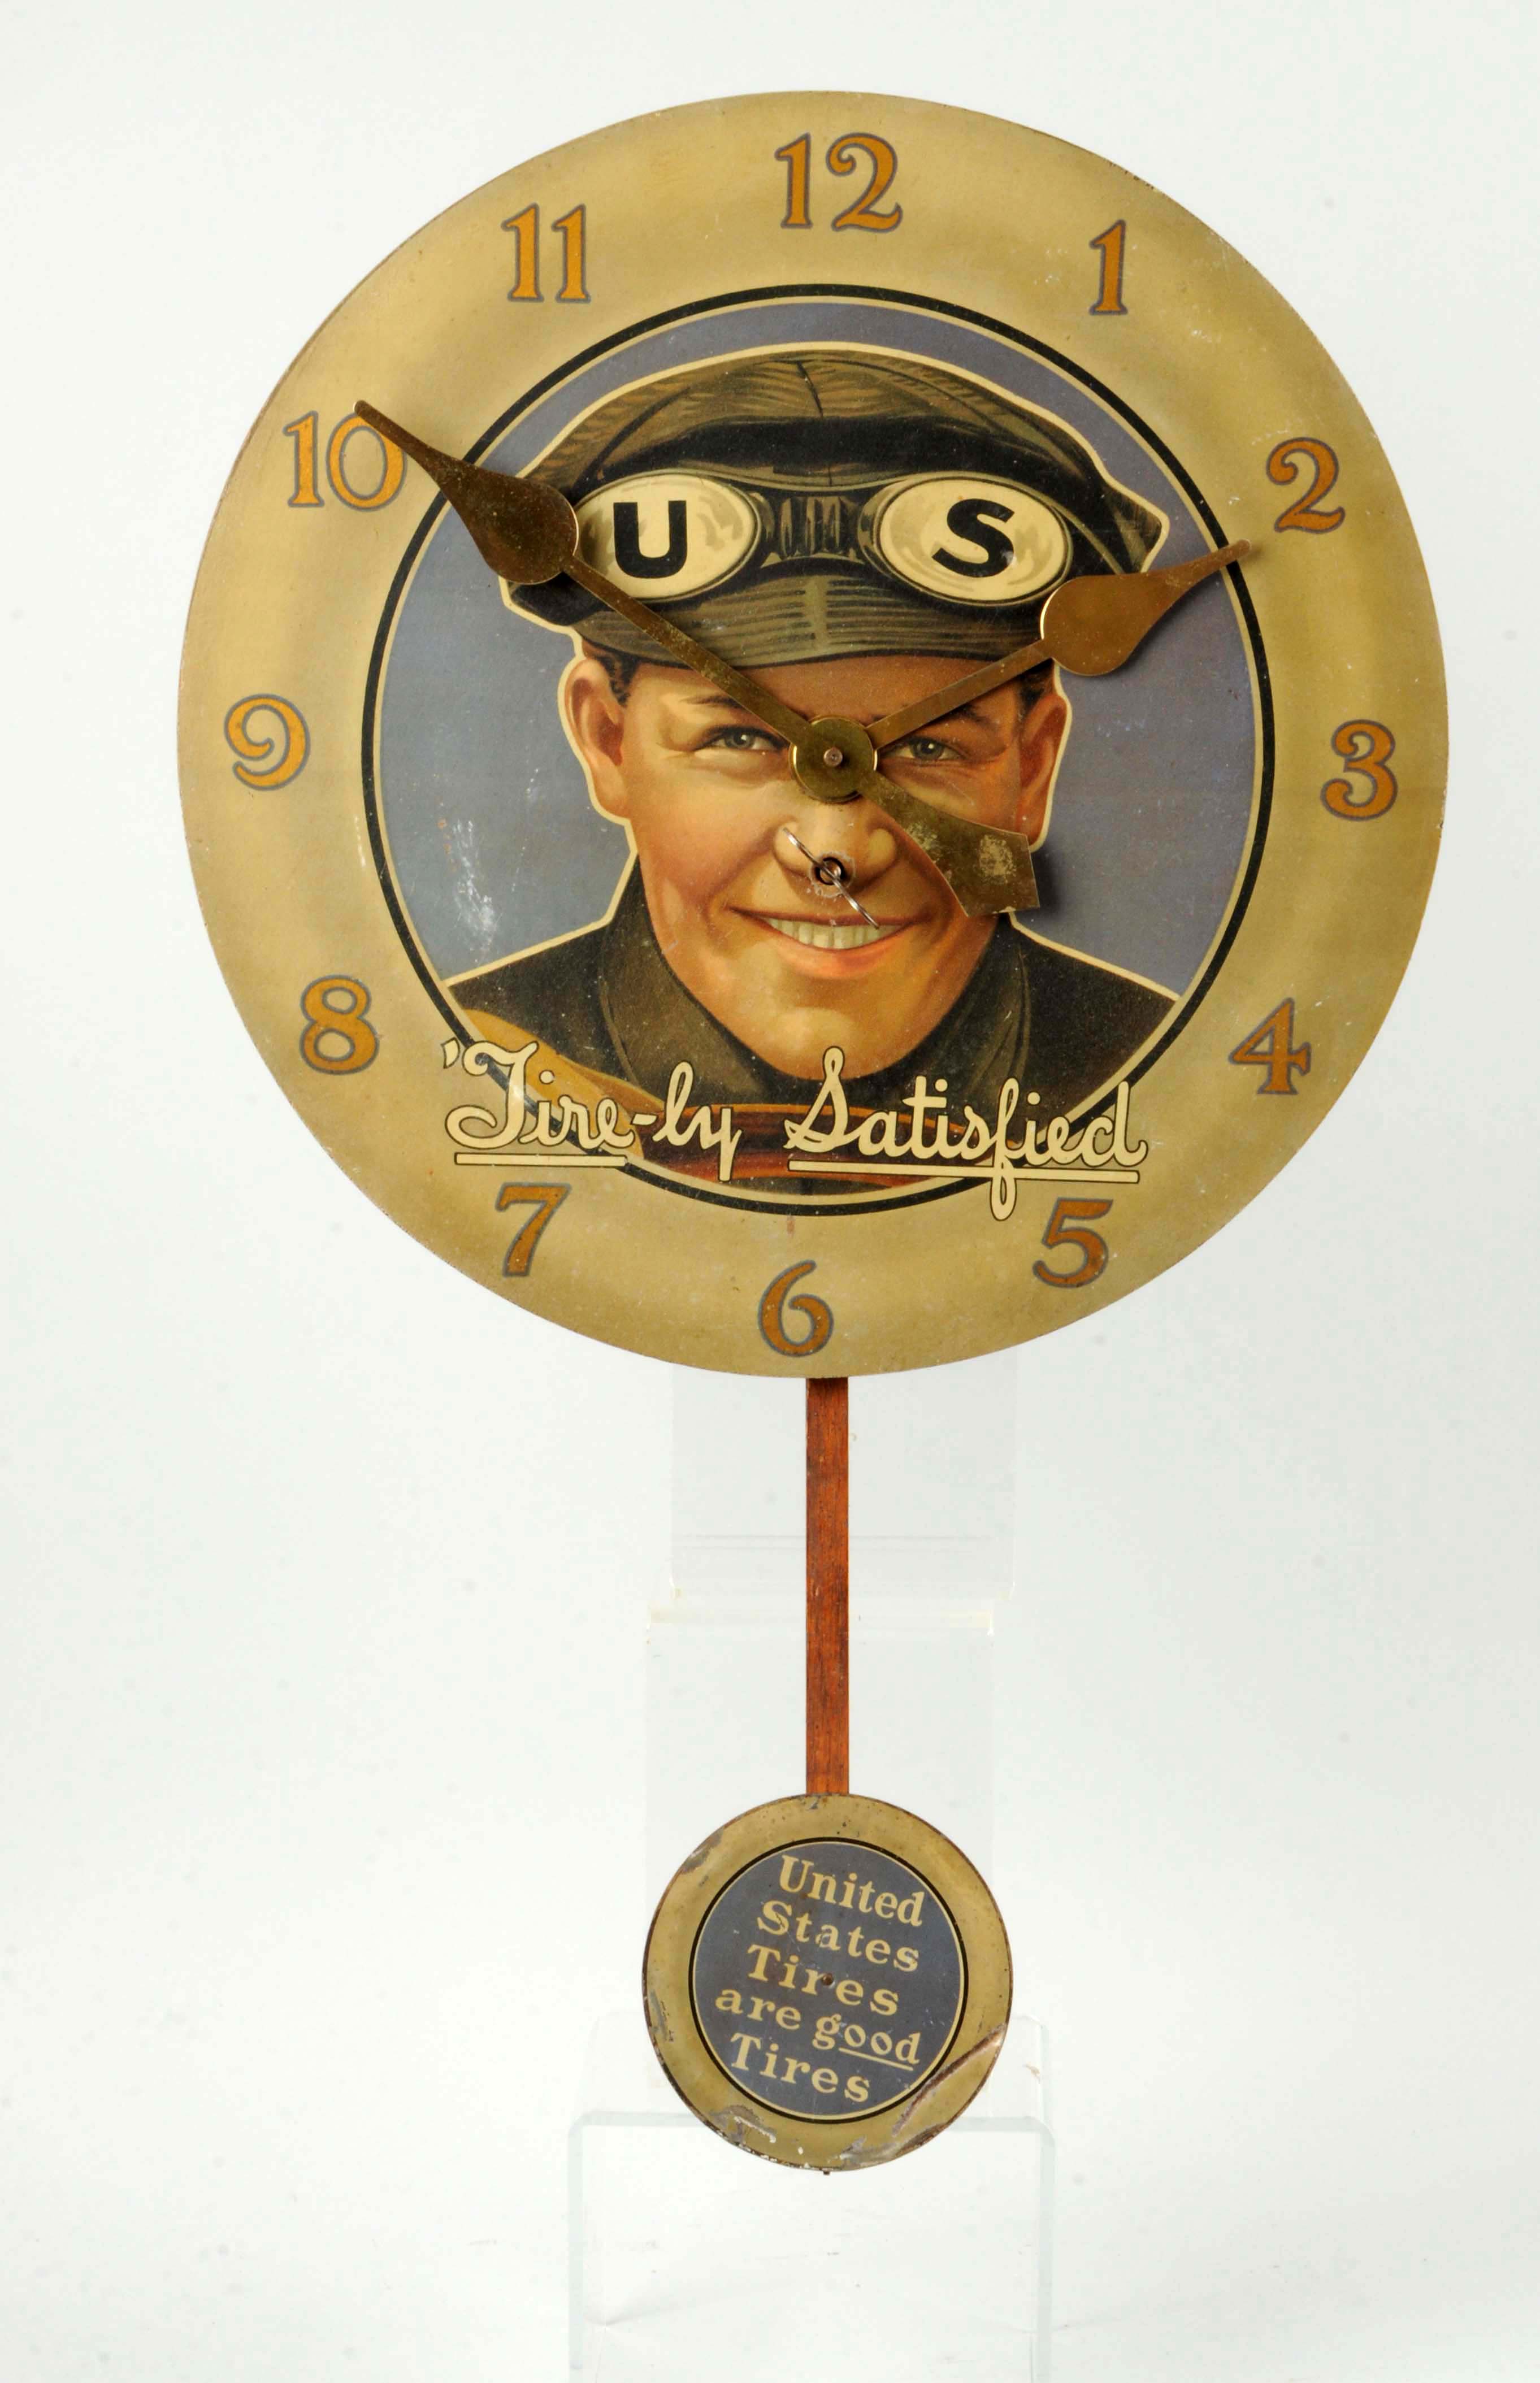 US Tires "Tire-ly Satisfied" w/ Logo & Clock, Estimated at $10,000-20,000.